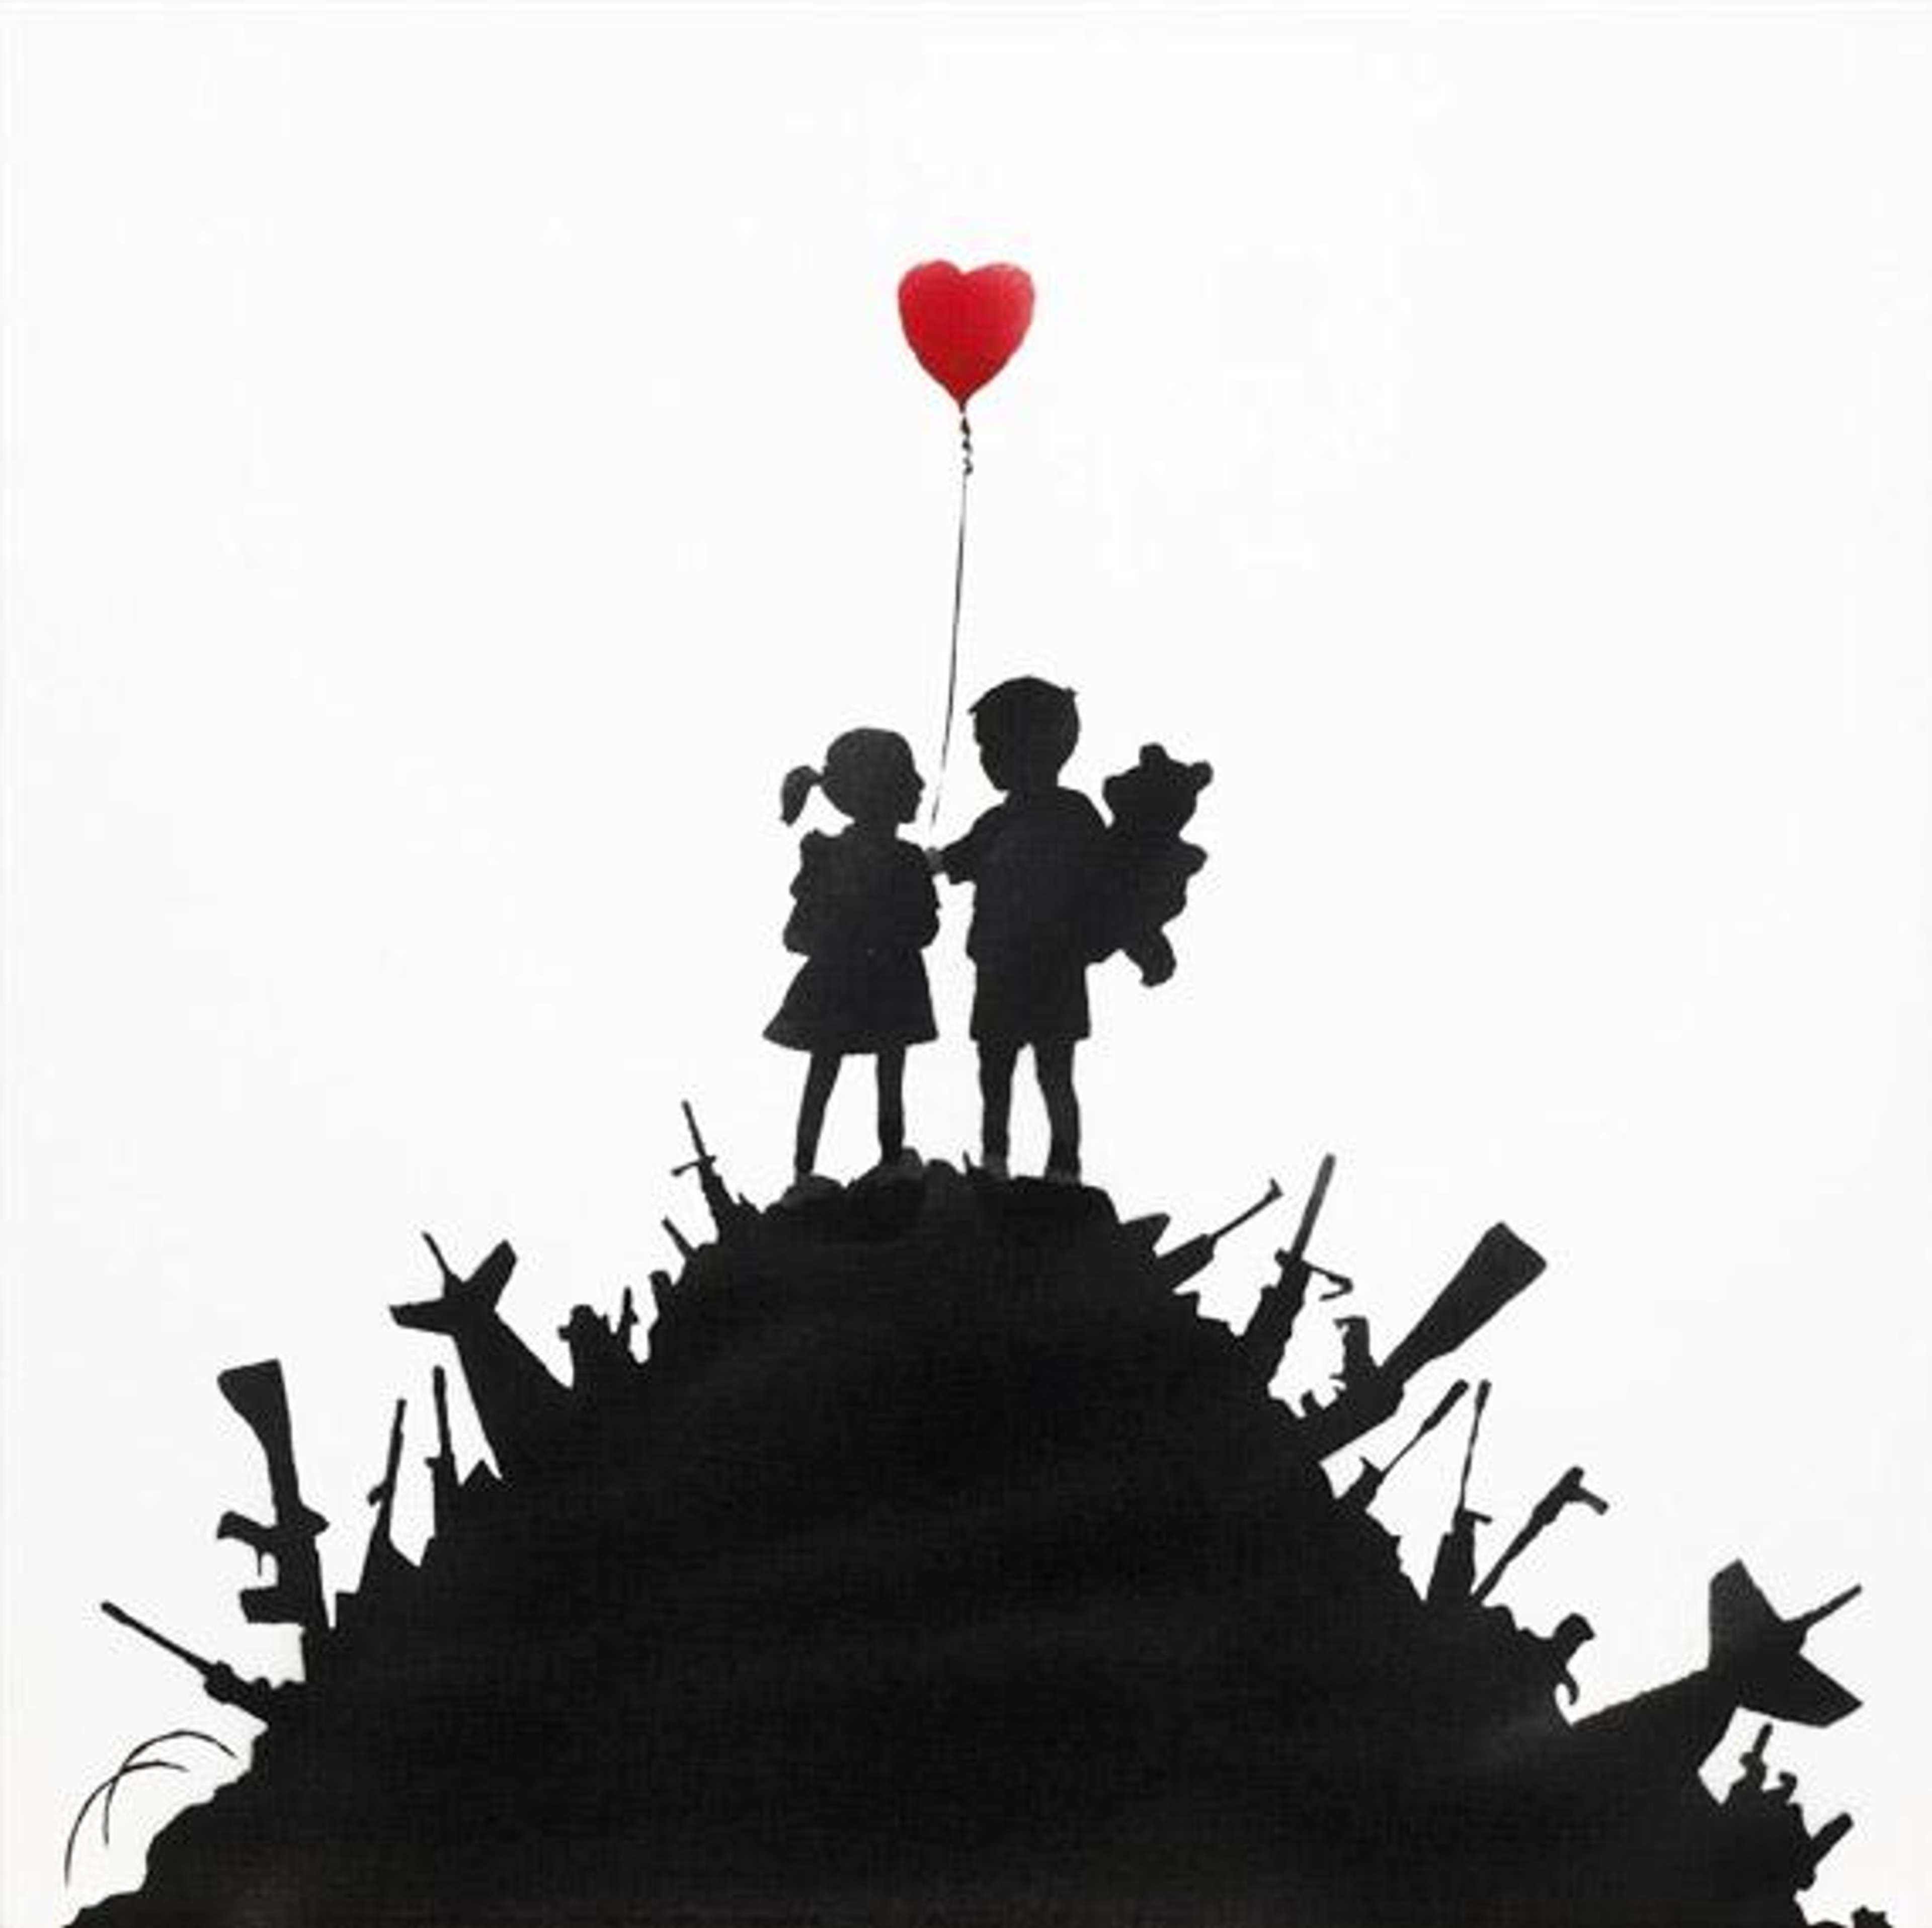 Disillusioned Youth: The Theme Of Childhood In Banksy’s Prints